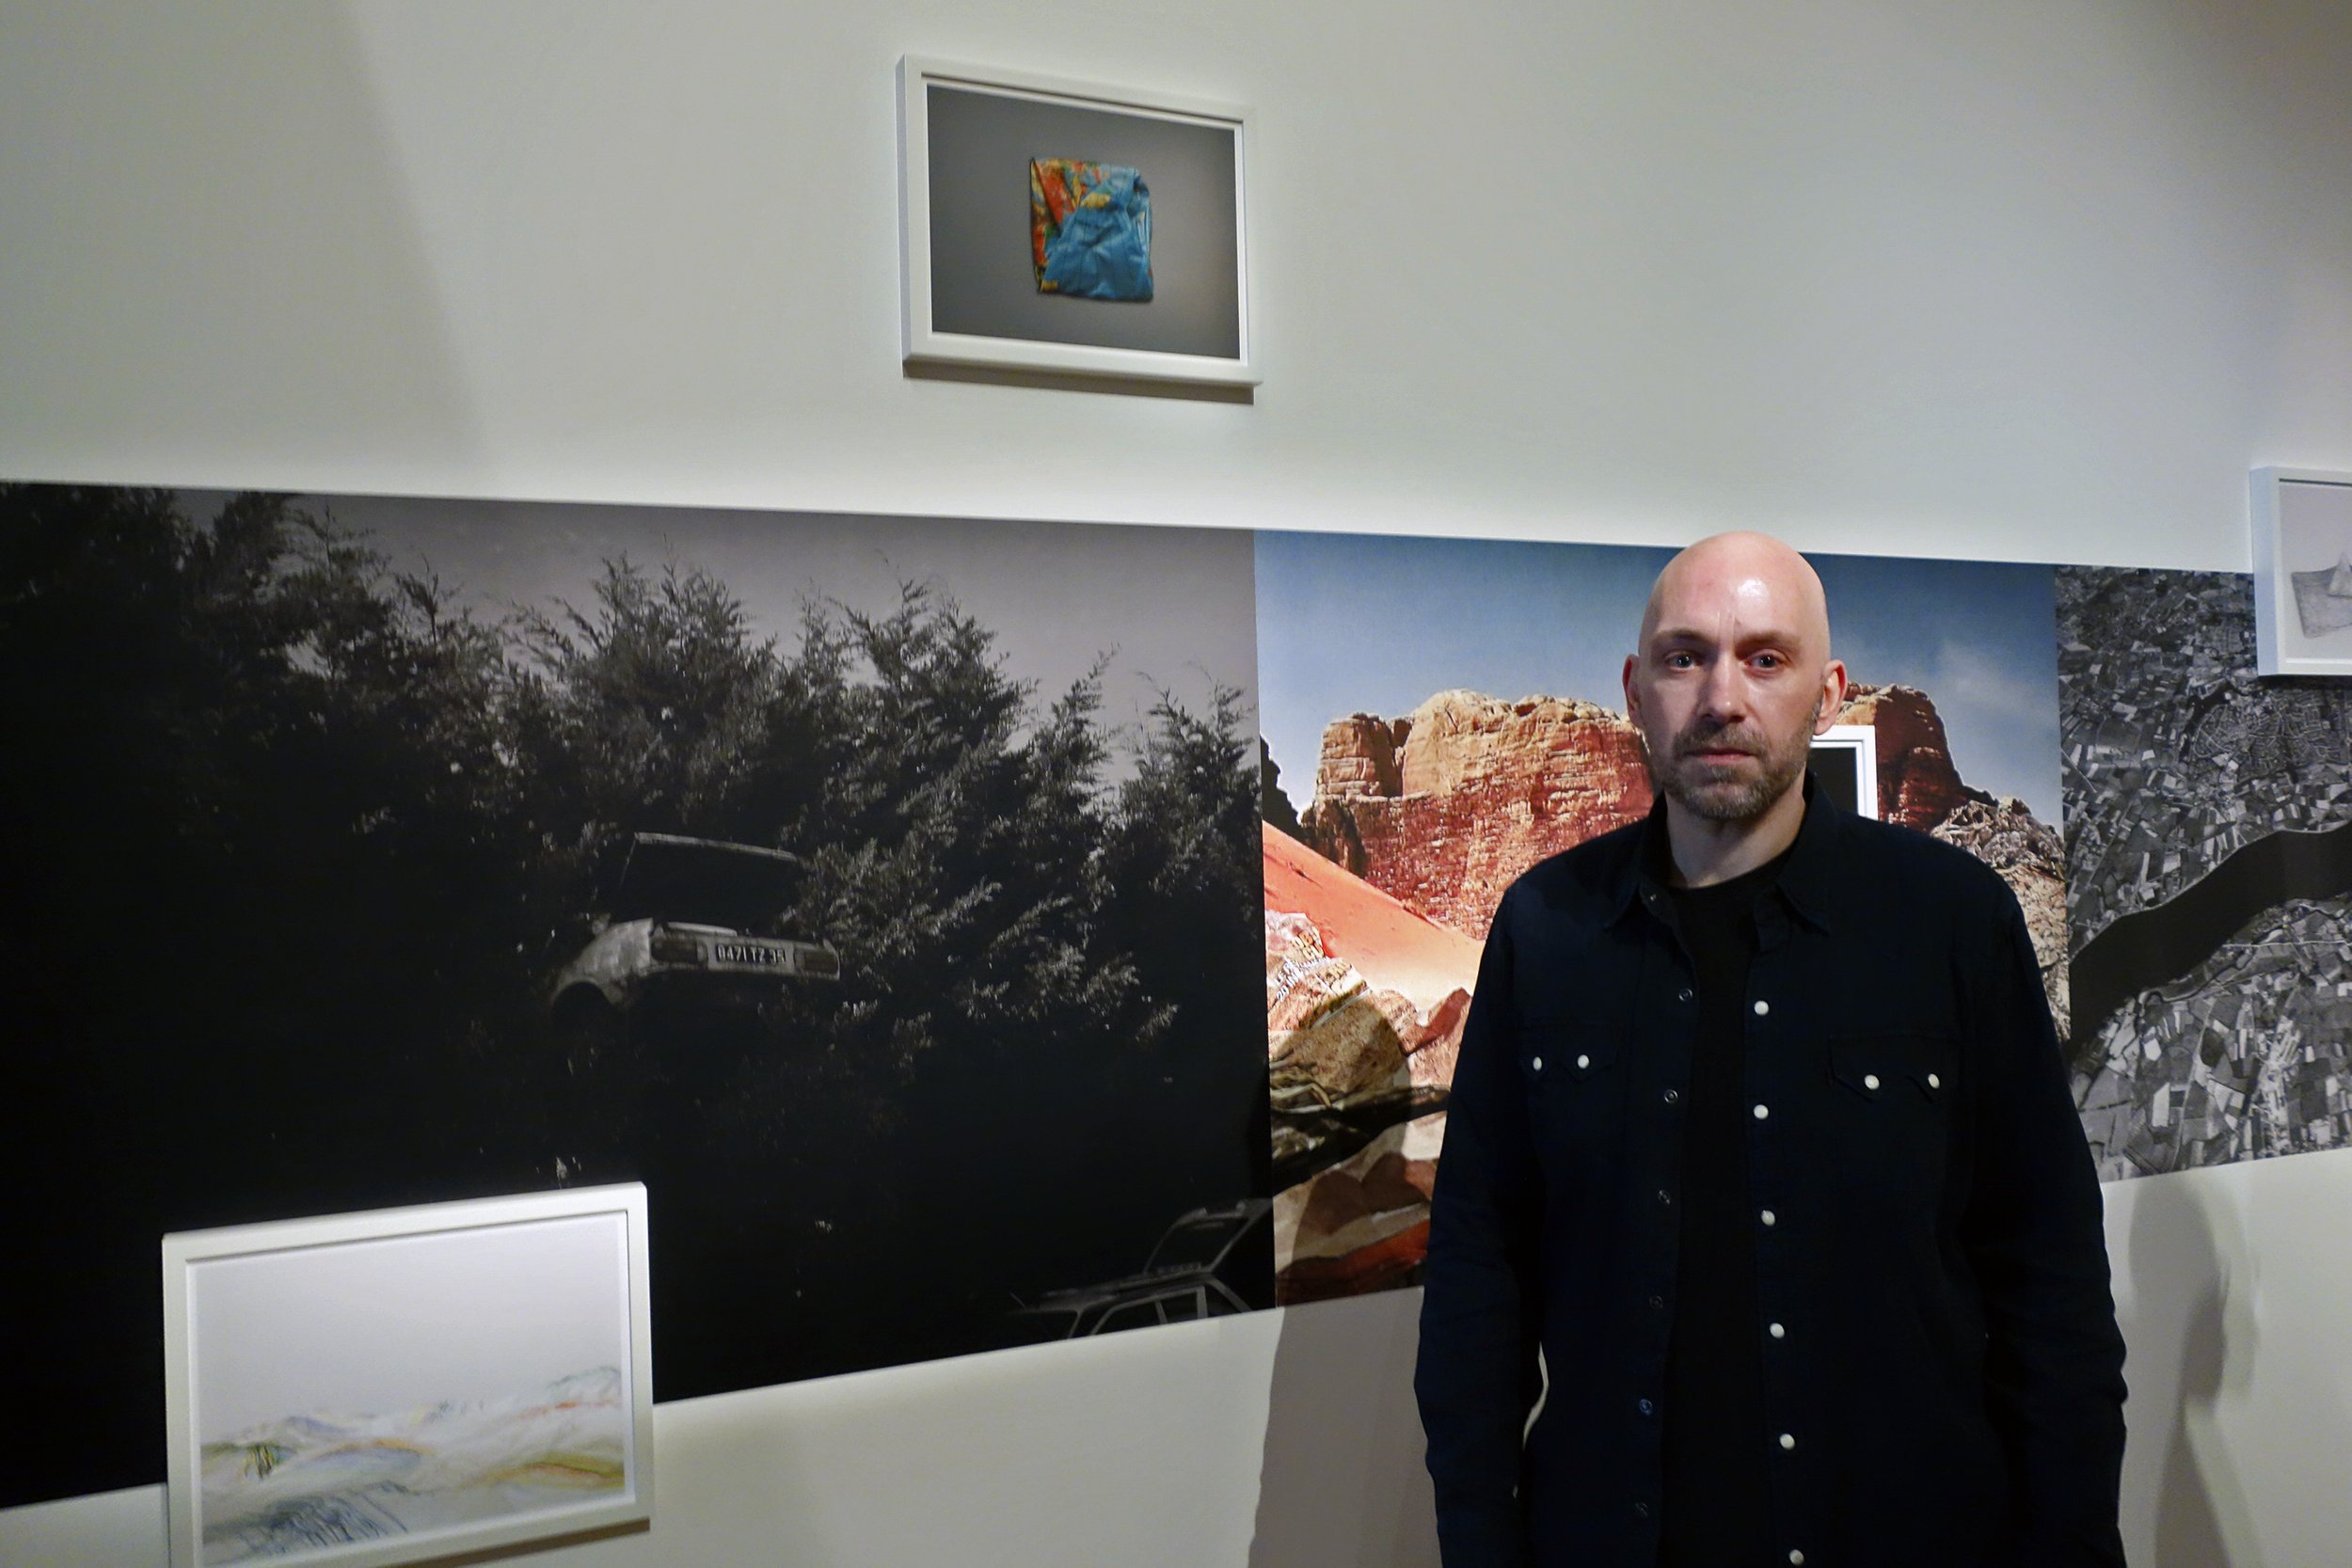  Photographer Michael Le Belhomme with his work 